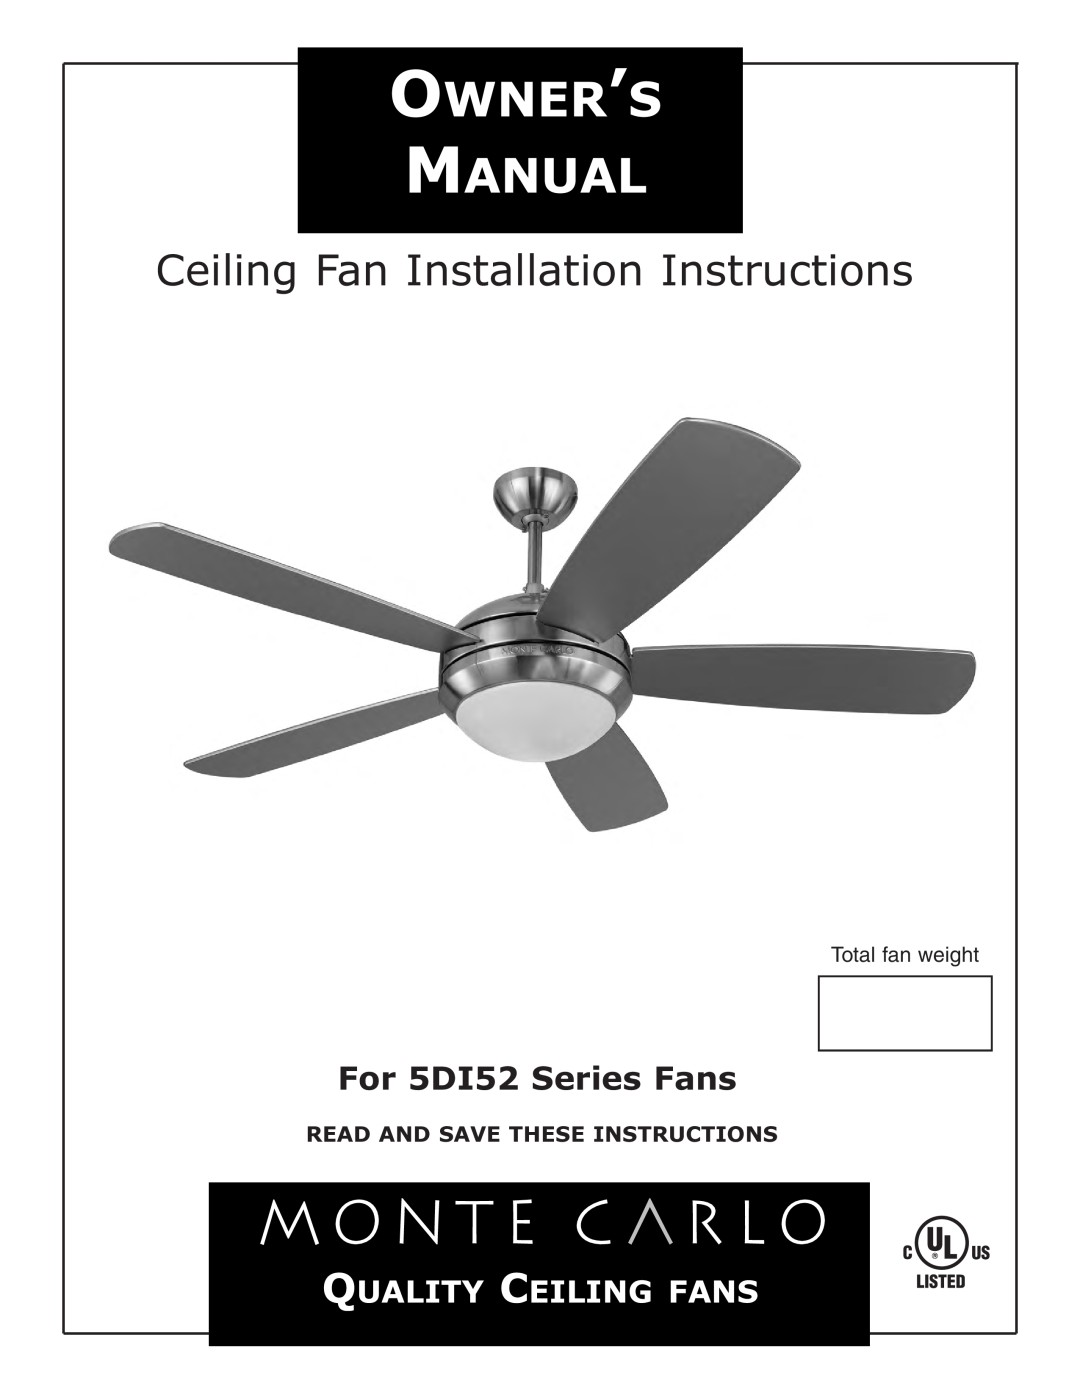 Monte Carlo Fan Company installation instructions Read And Save These Instructions, For 5DI52 Series Fans 